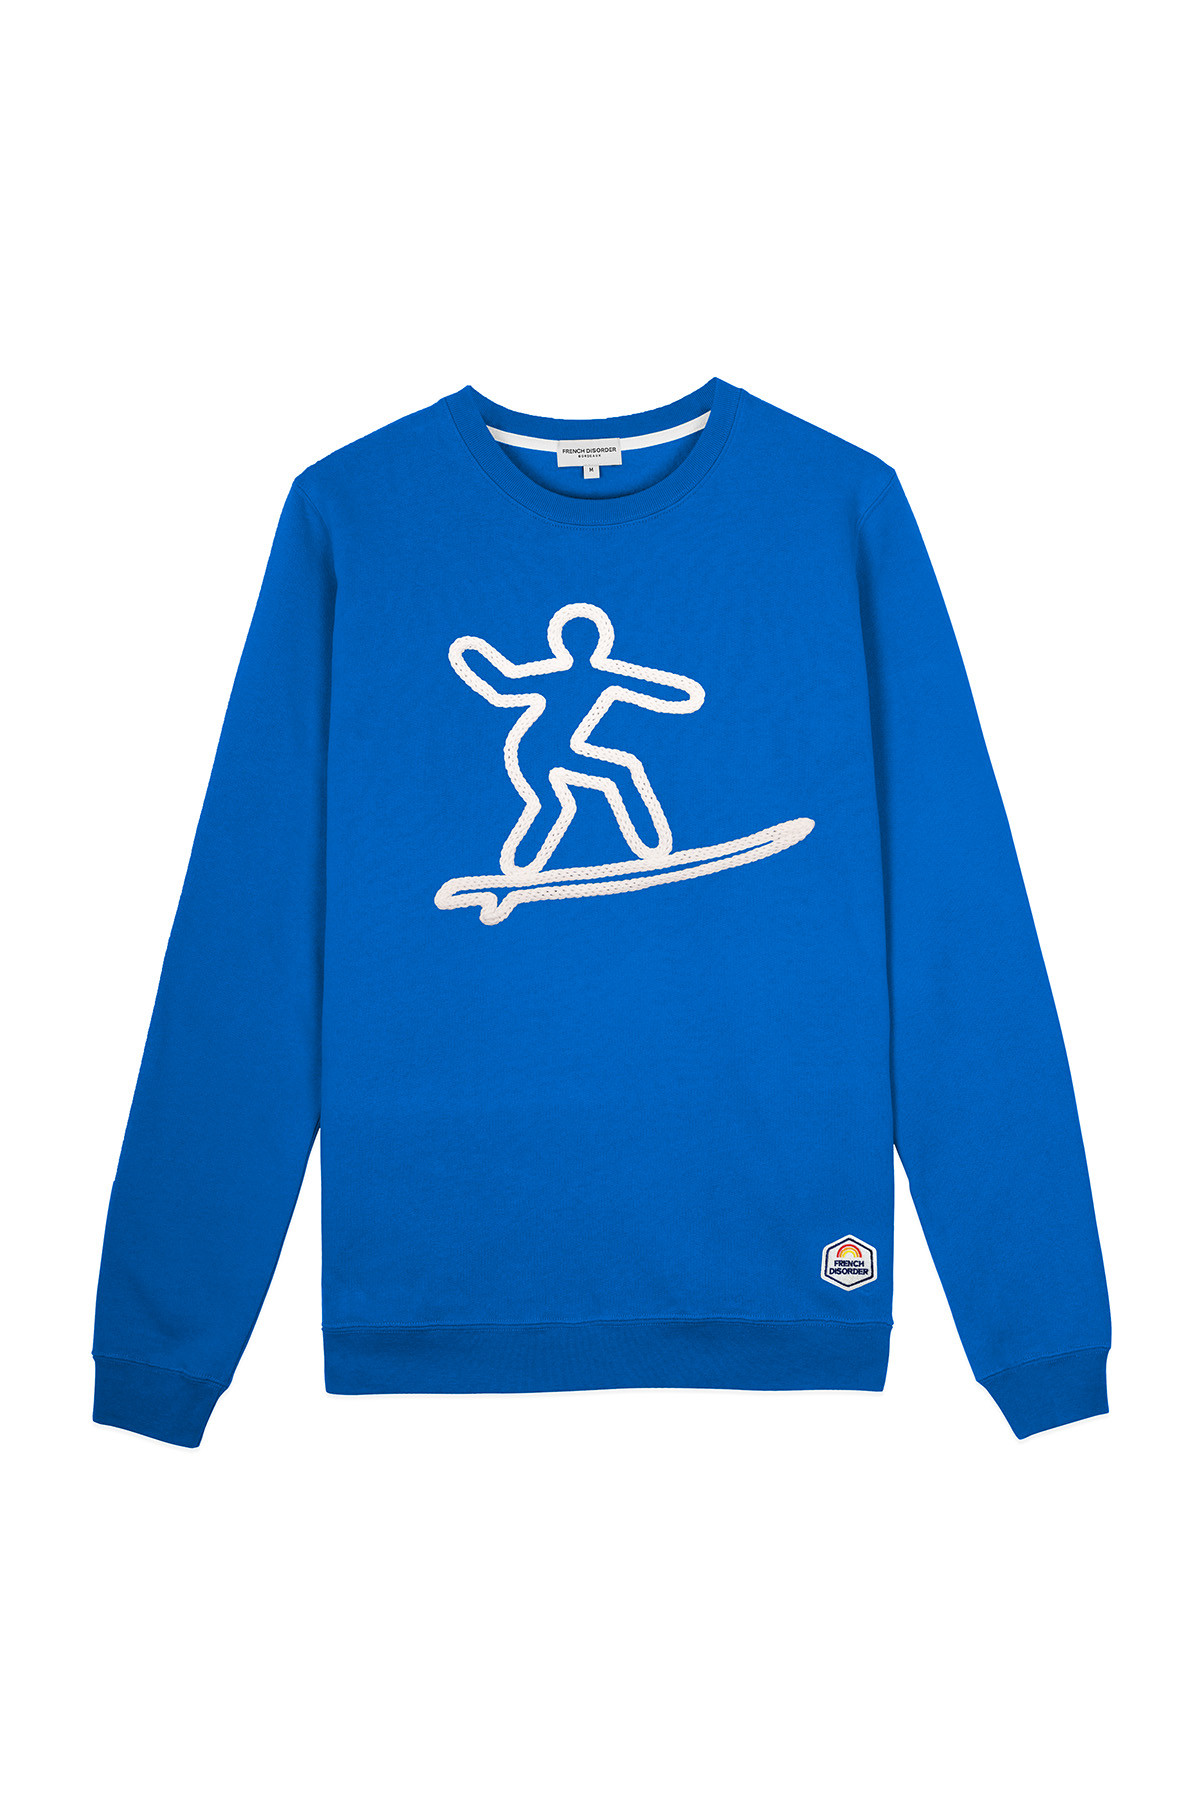 Sweat Dylan SURFER (tricotin)